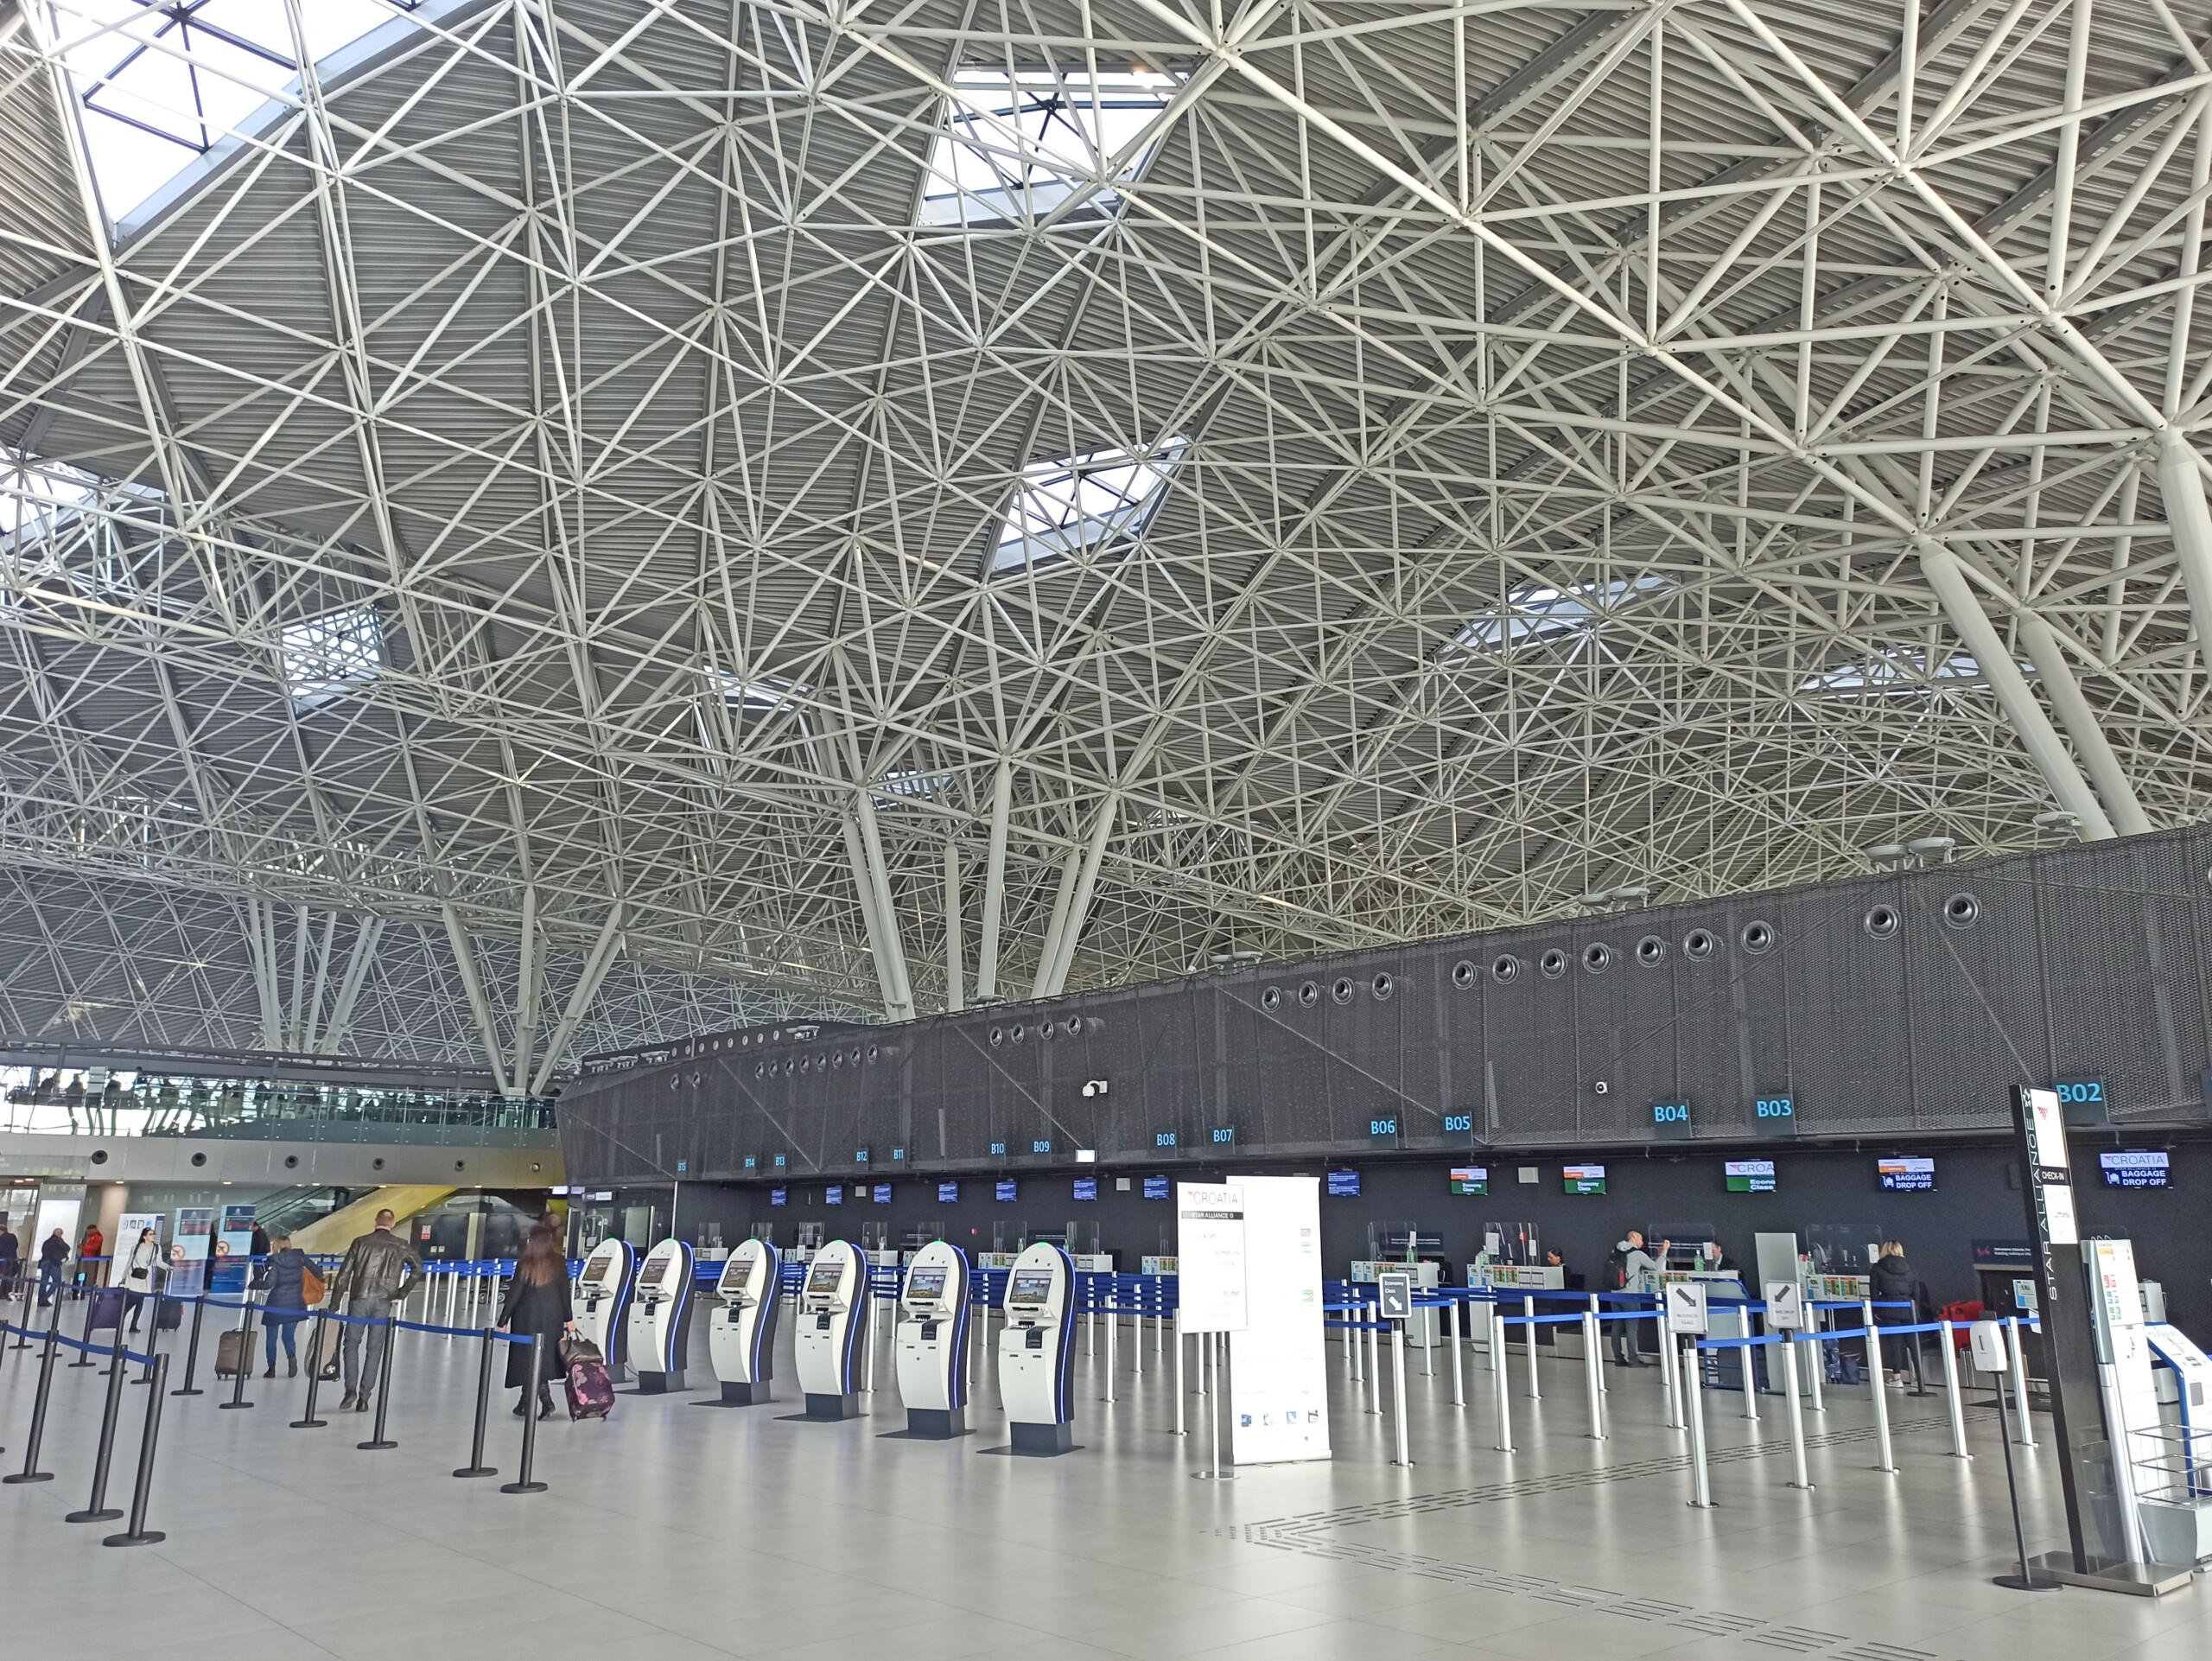 Zagreb Airport Check-in Hall